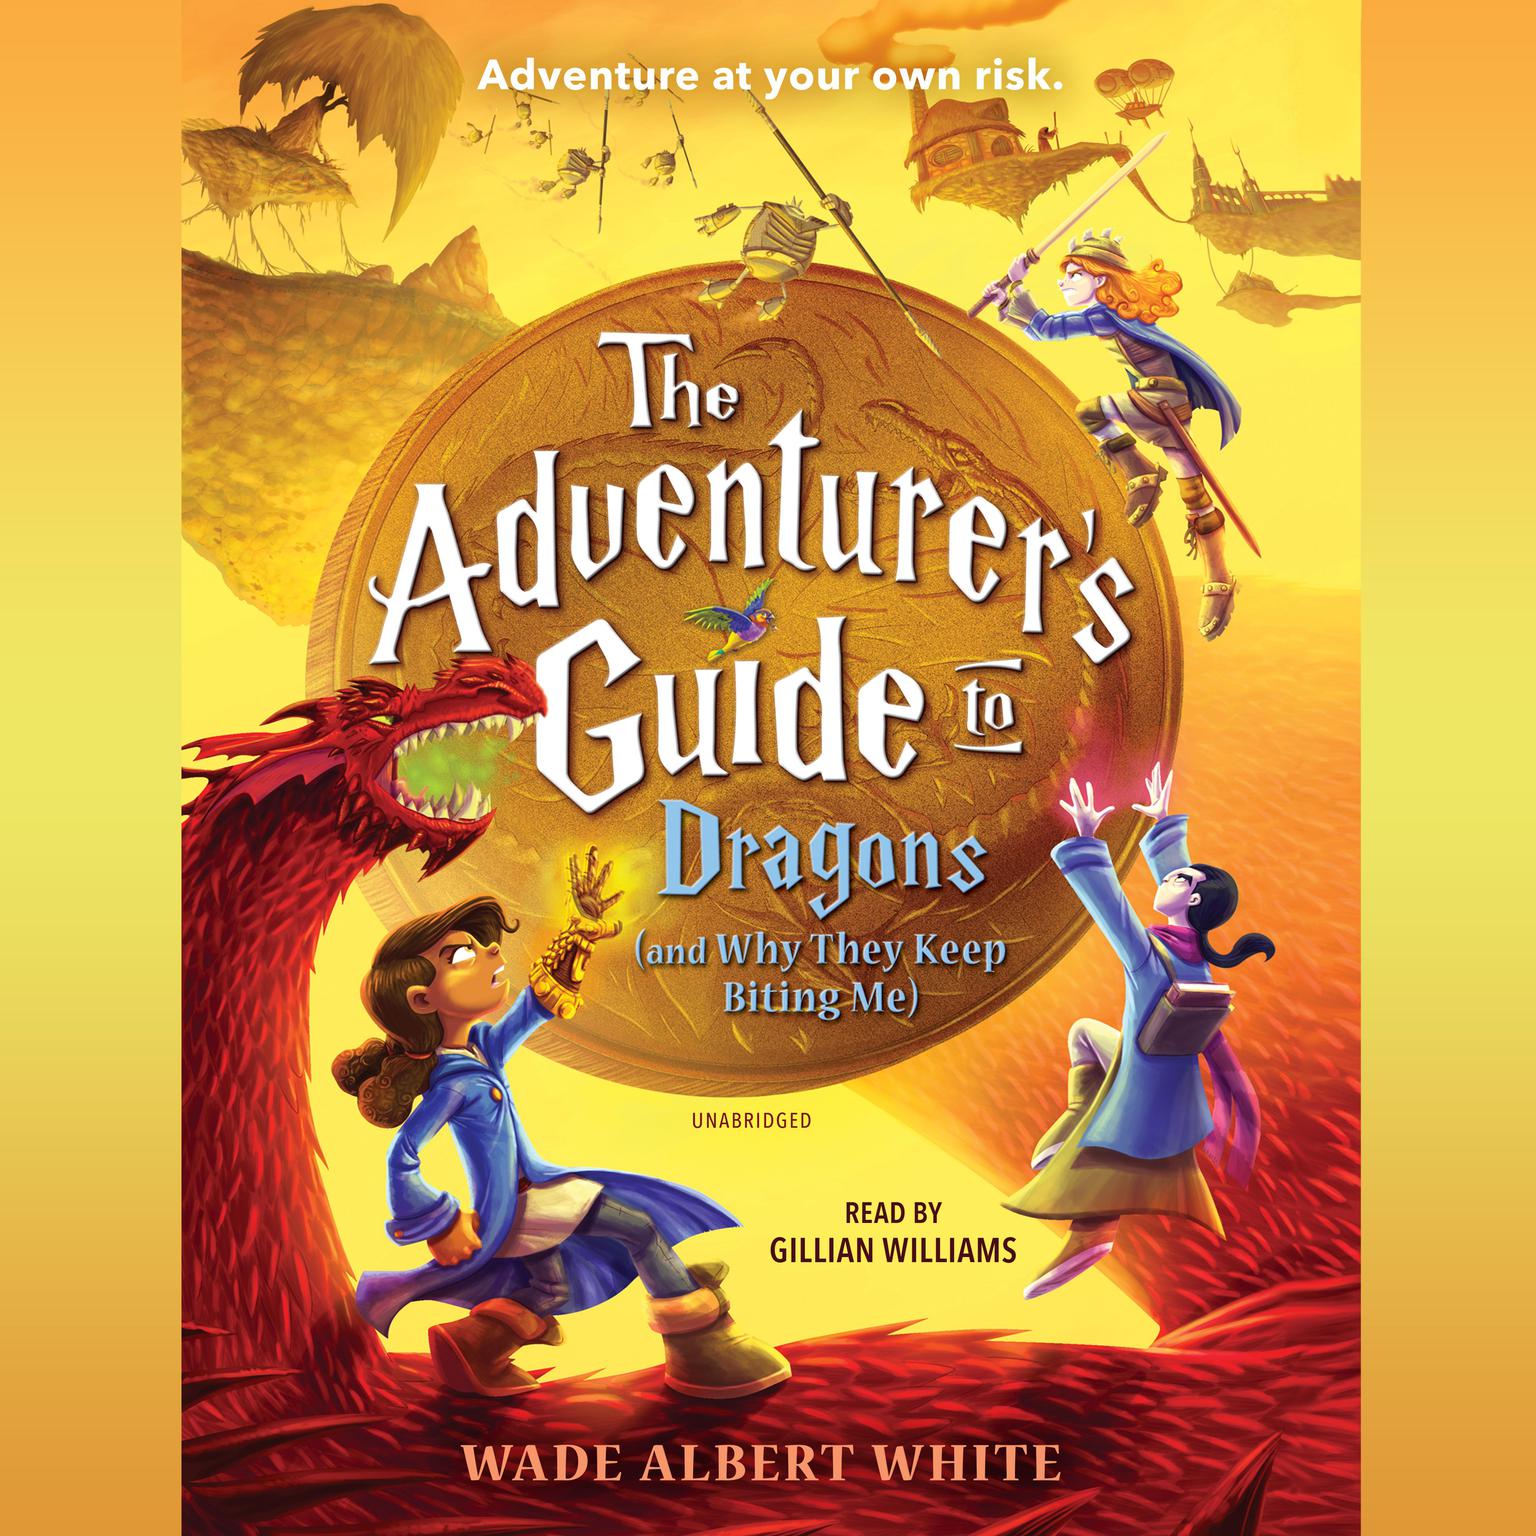 The Adventurers Guide to Dragons (and Why They Keep Biting Me) Audiobook, by Wade Albert White